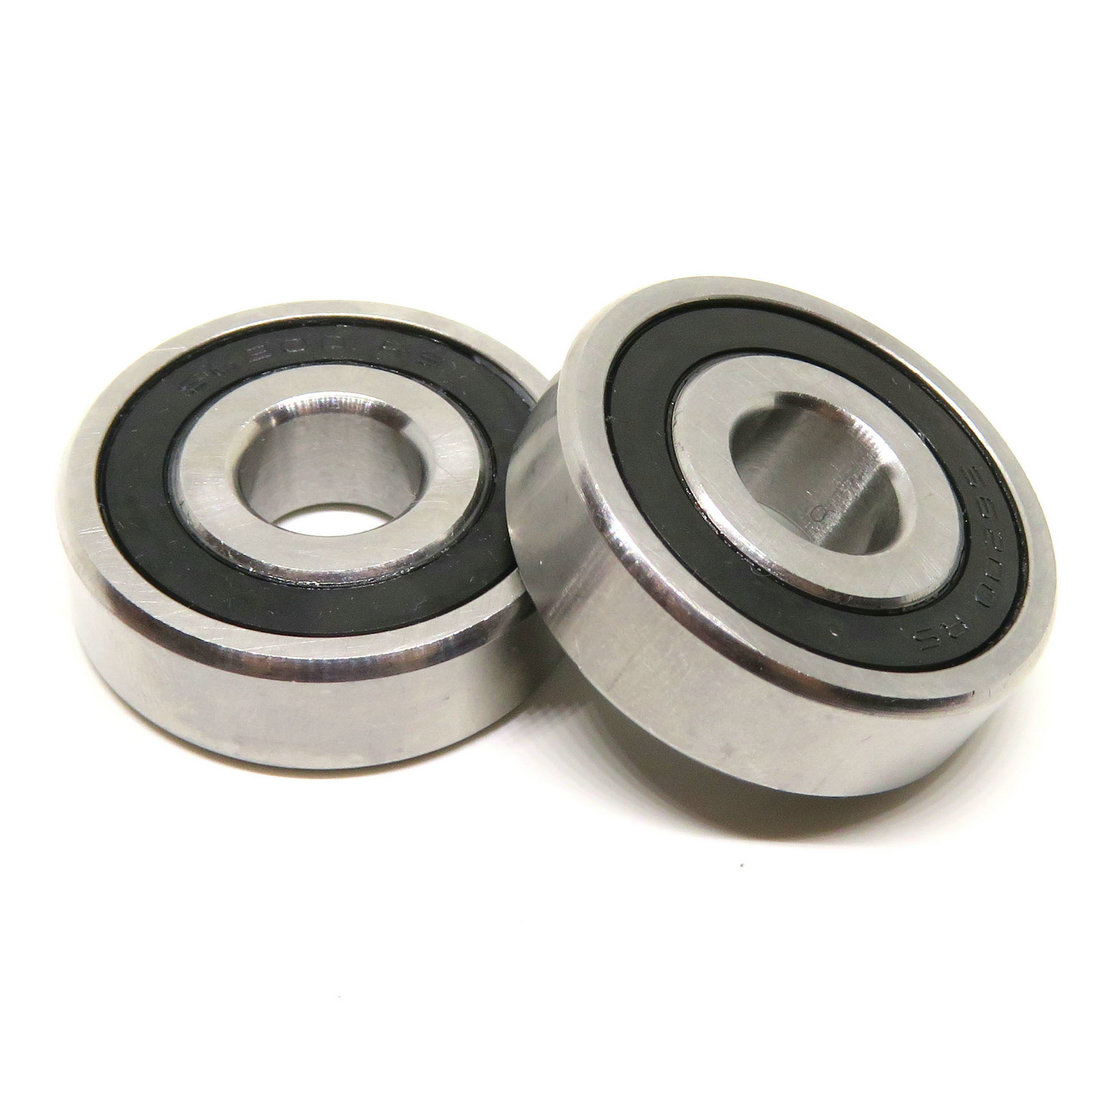 Industry Machine Part S6304-2RS Stainless Steel Deep groove Ball Bearing 20x52x15mm S6304RS.jpg